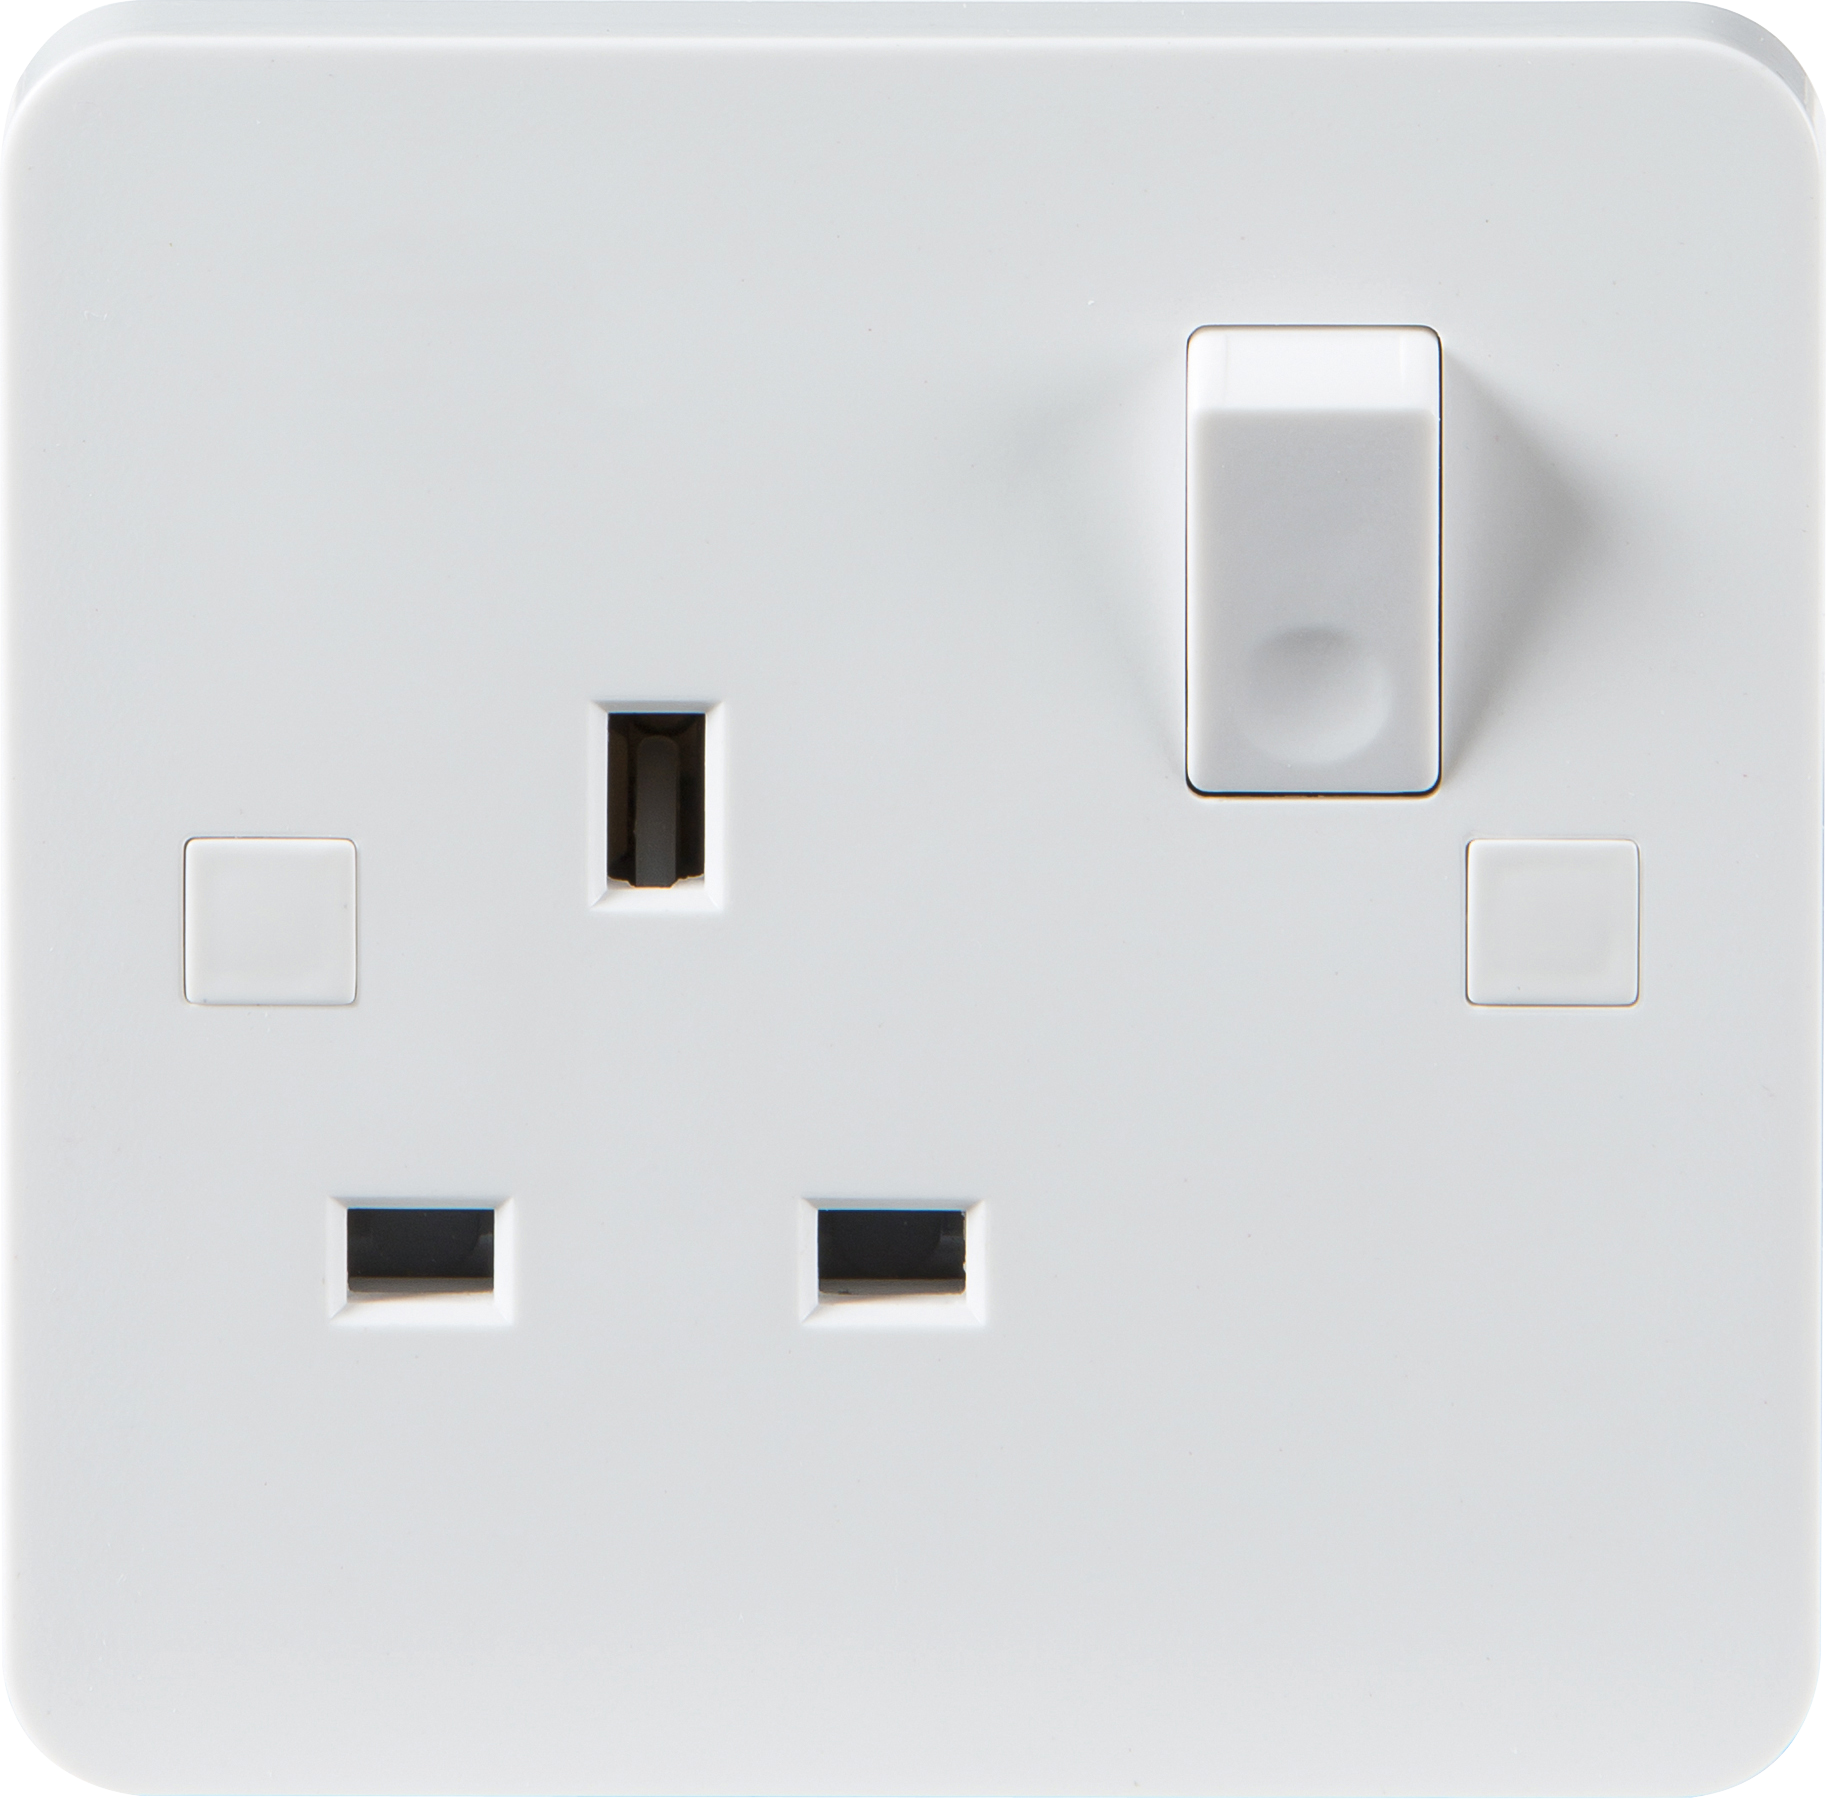 13A 1G DP Switched Socket - 9mm - PU7000 